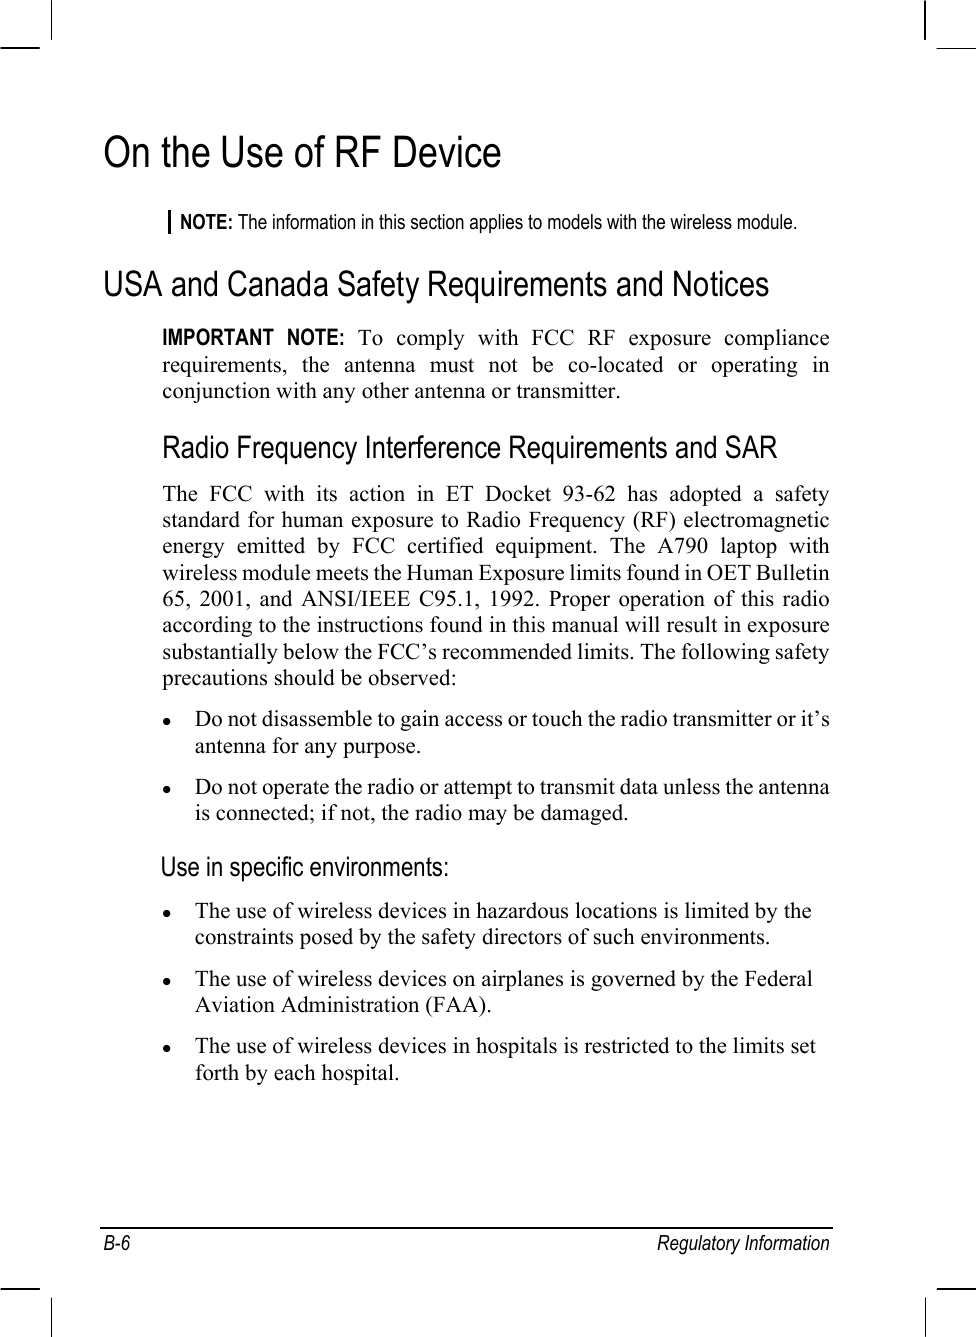  B-6 Regulatory Information On the Use of RF Device NOTE: The information in this section applies to models with the wireless module. USA and Canada Safety Requirements and Notices IMPORTANT NOTE: To comply with FCC RF exposure compliance requirements, the antenna must not be co-located or operating in conjunction with any other antenna or transmitter. Radio Frequency Interference Requirements and SAR The FCC with its action in ET Docket 93-62 has adopted a safety standard for human exposure to Radio Frequency (RF) electromagnetic energy emitted by FCC certified equipment. The A790 laptop with wireless module meets the Human Exposure limits found in OET Bulletin 65, 2001, and ANSI/IEEE C95.1, 1992. Proper operation of this radio according to the instructions found in this manual will result in exposure substantially below the FCC’s recommended limits. The following safety precautions should be observed: z Do not disassemble to gain access or touch the radio transmitter or it’s antenna for any purpose. z Do not operate the radio or attempt to transmit data unless the antenna is connected; if not, the radio may be damaged. Use in specific environments: z The use of wireless devices in hazardous locations is limited by the constraints posed by the safety directors of such environments. z The use of wireless devices on airplanes is governed by the Federal Aviation Administration (FAA). z The use of wireless devices in hospitals is restricted to the limits set forth by each hospital. 